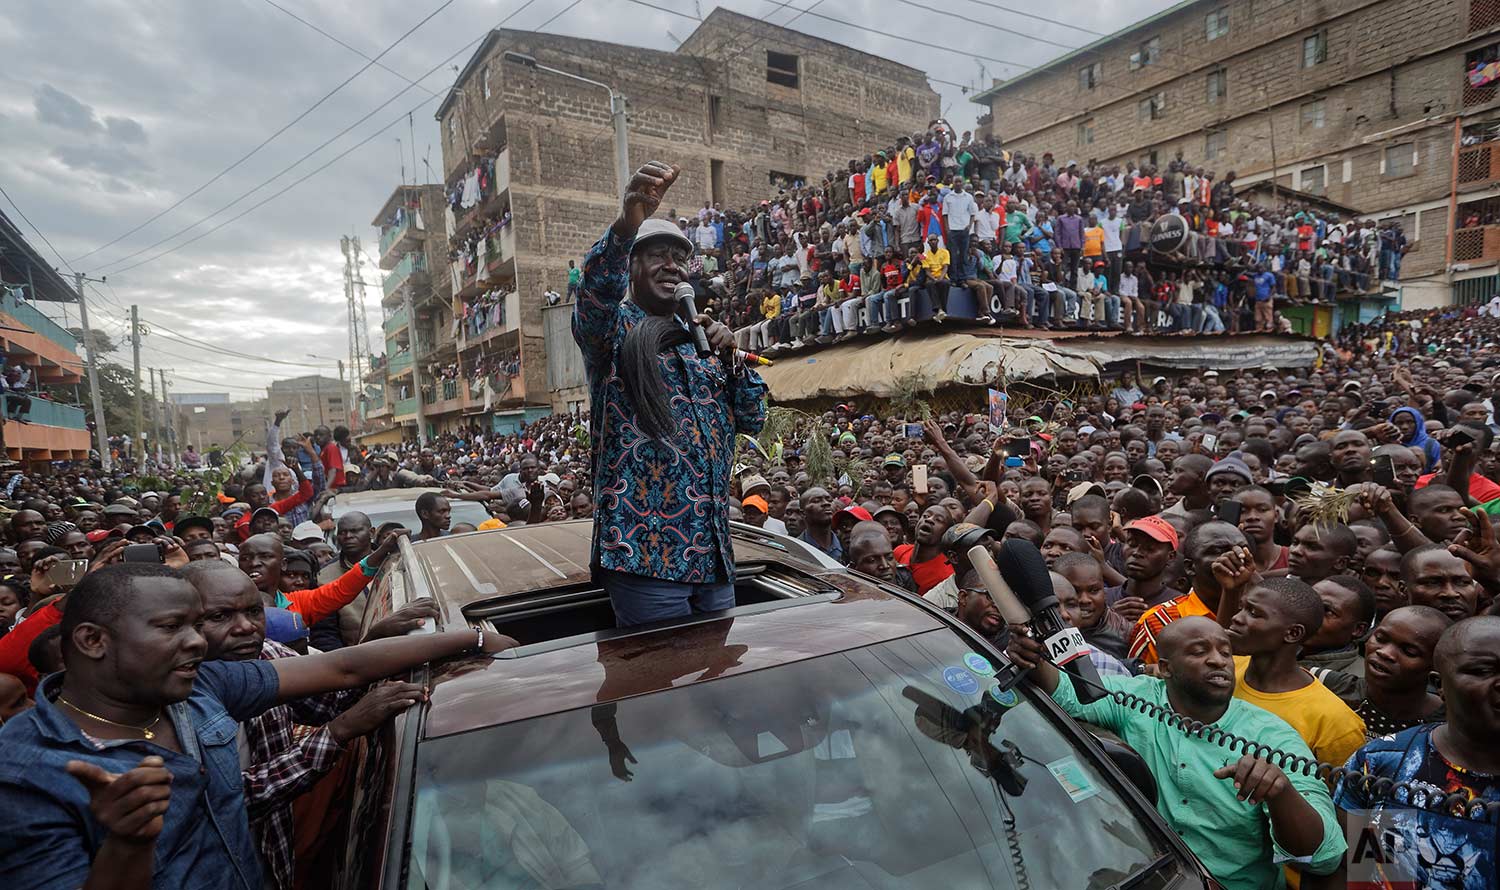  In this Sunday, Aug. 13, 2017 photo, Kenyan opposition leader Raila Odinga gestures to thousands of supporters gathered in the Mathare slum of Nairobi, Kenya. Odinga on Sunday condemned police killings of rioters during protests after the country's 